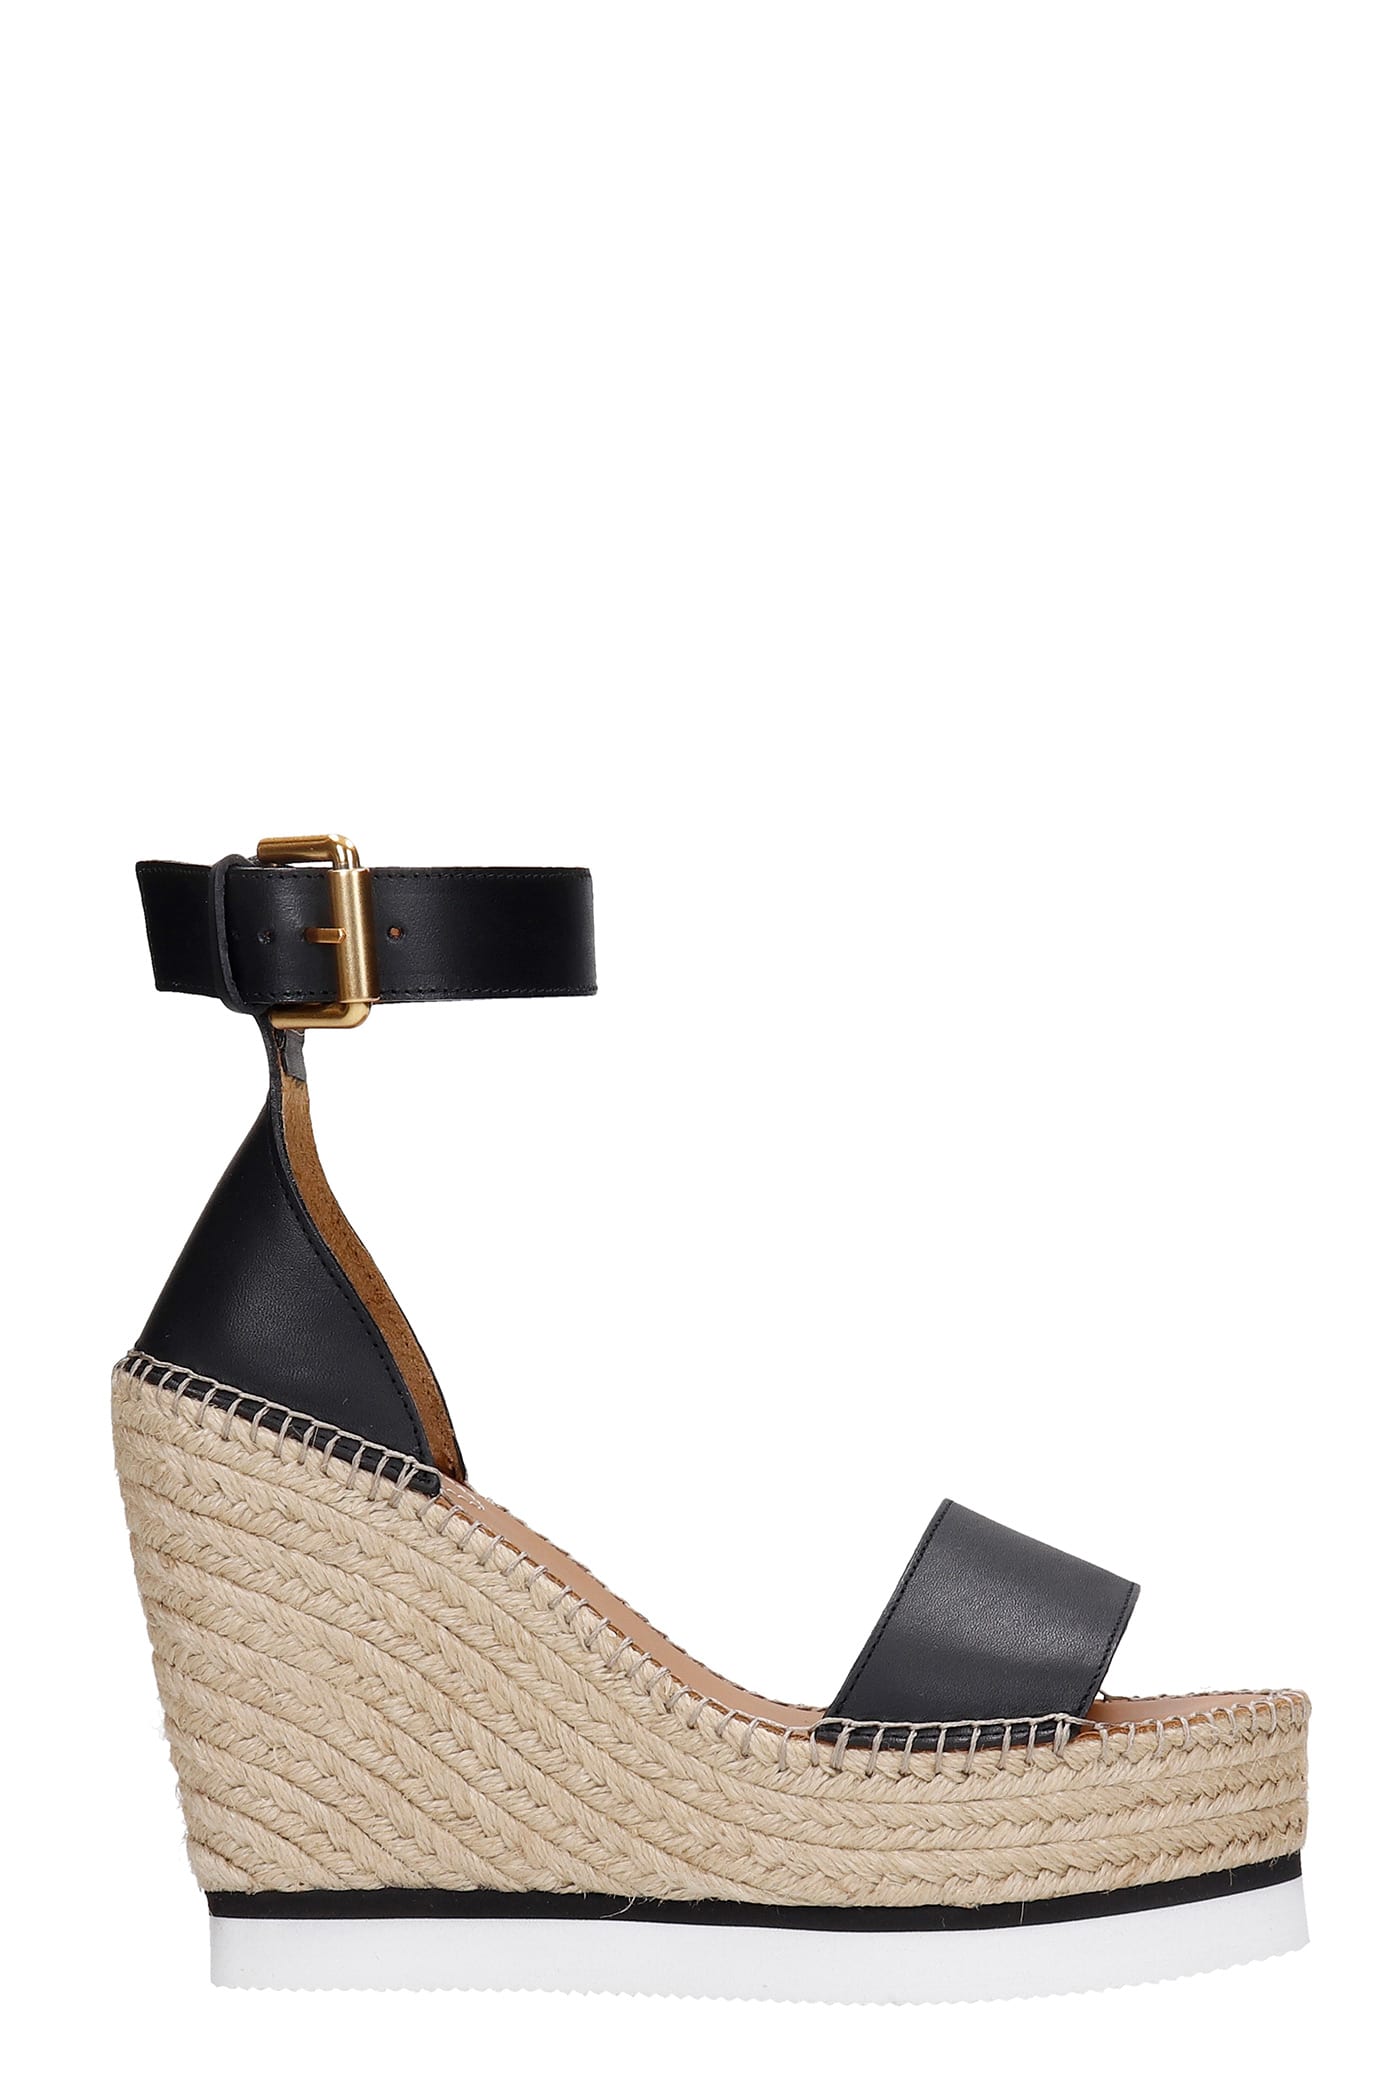 See by Chloé Wedges In Black Leather